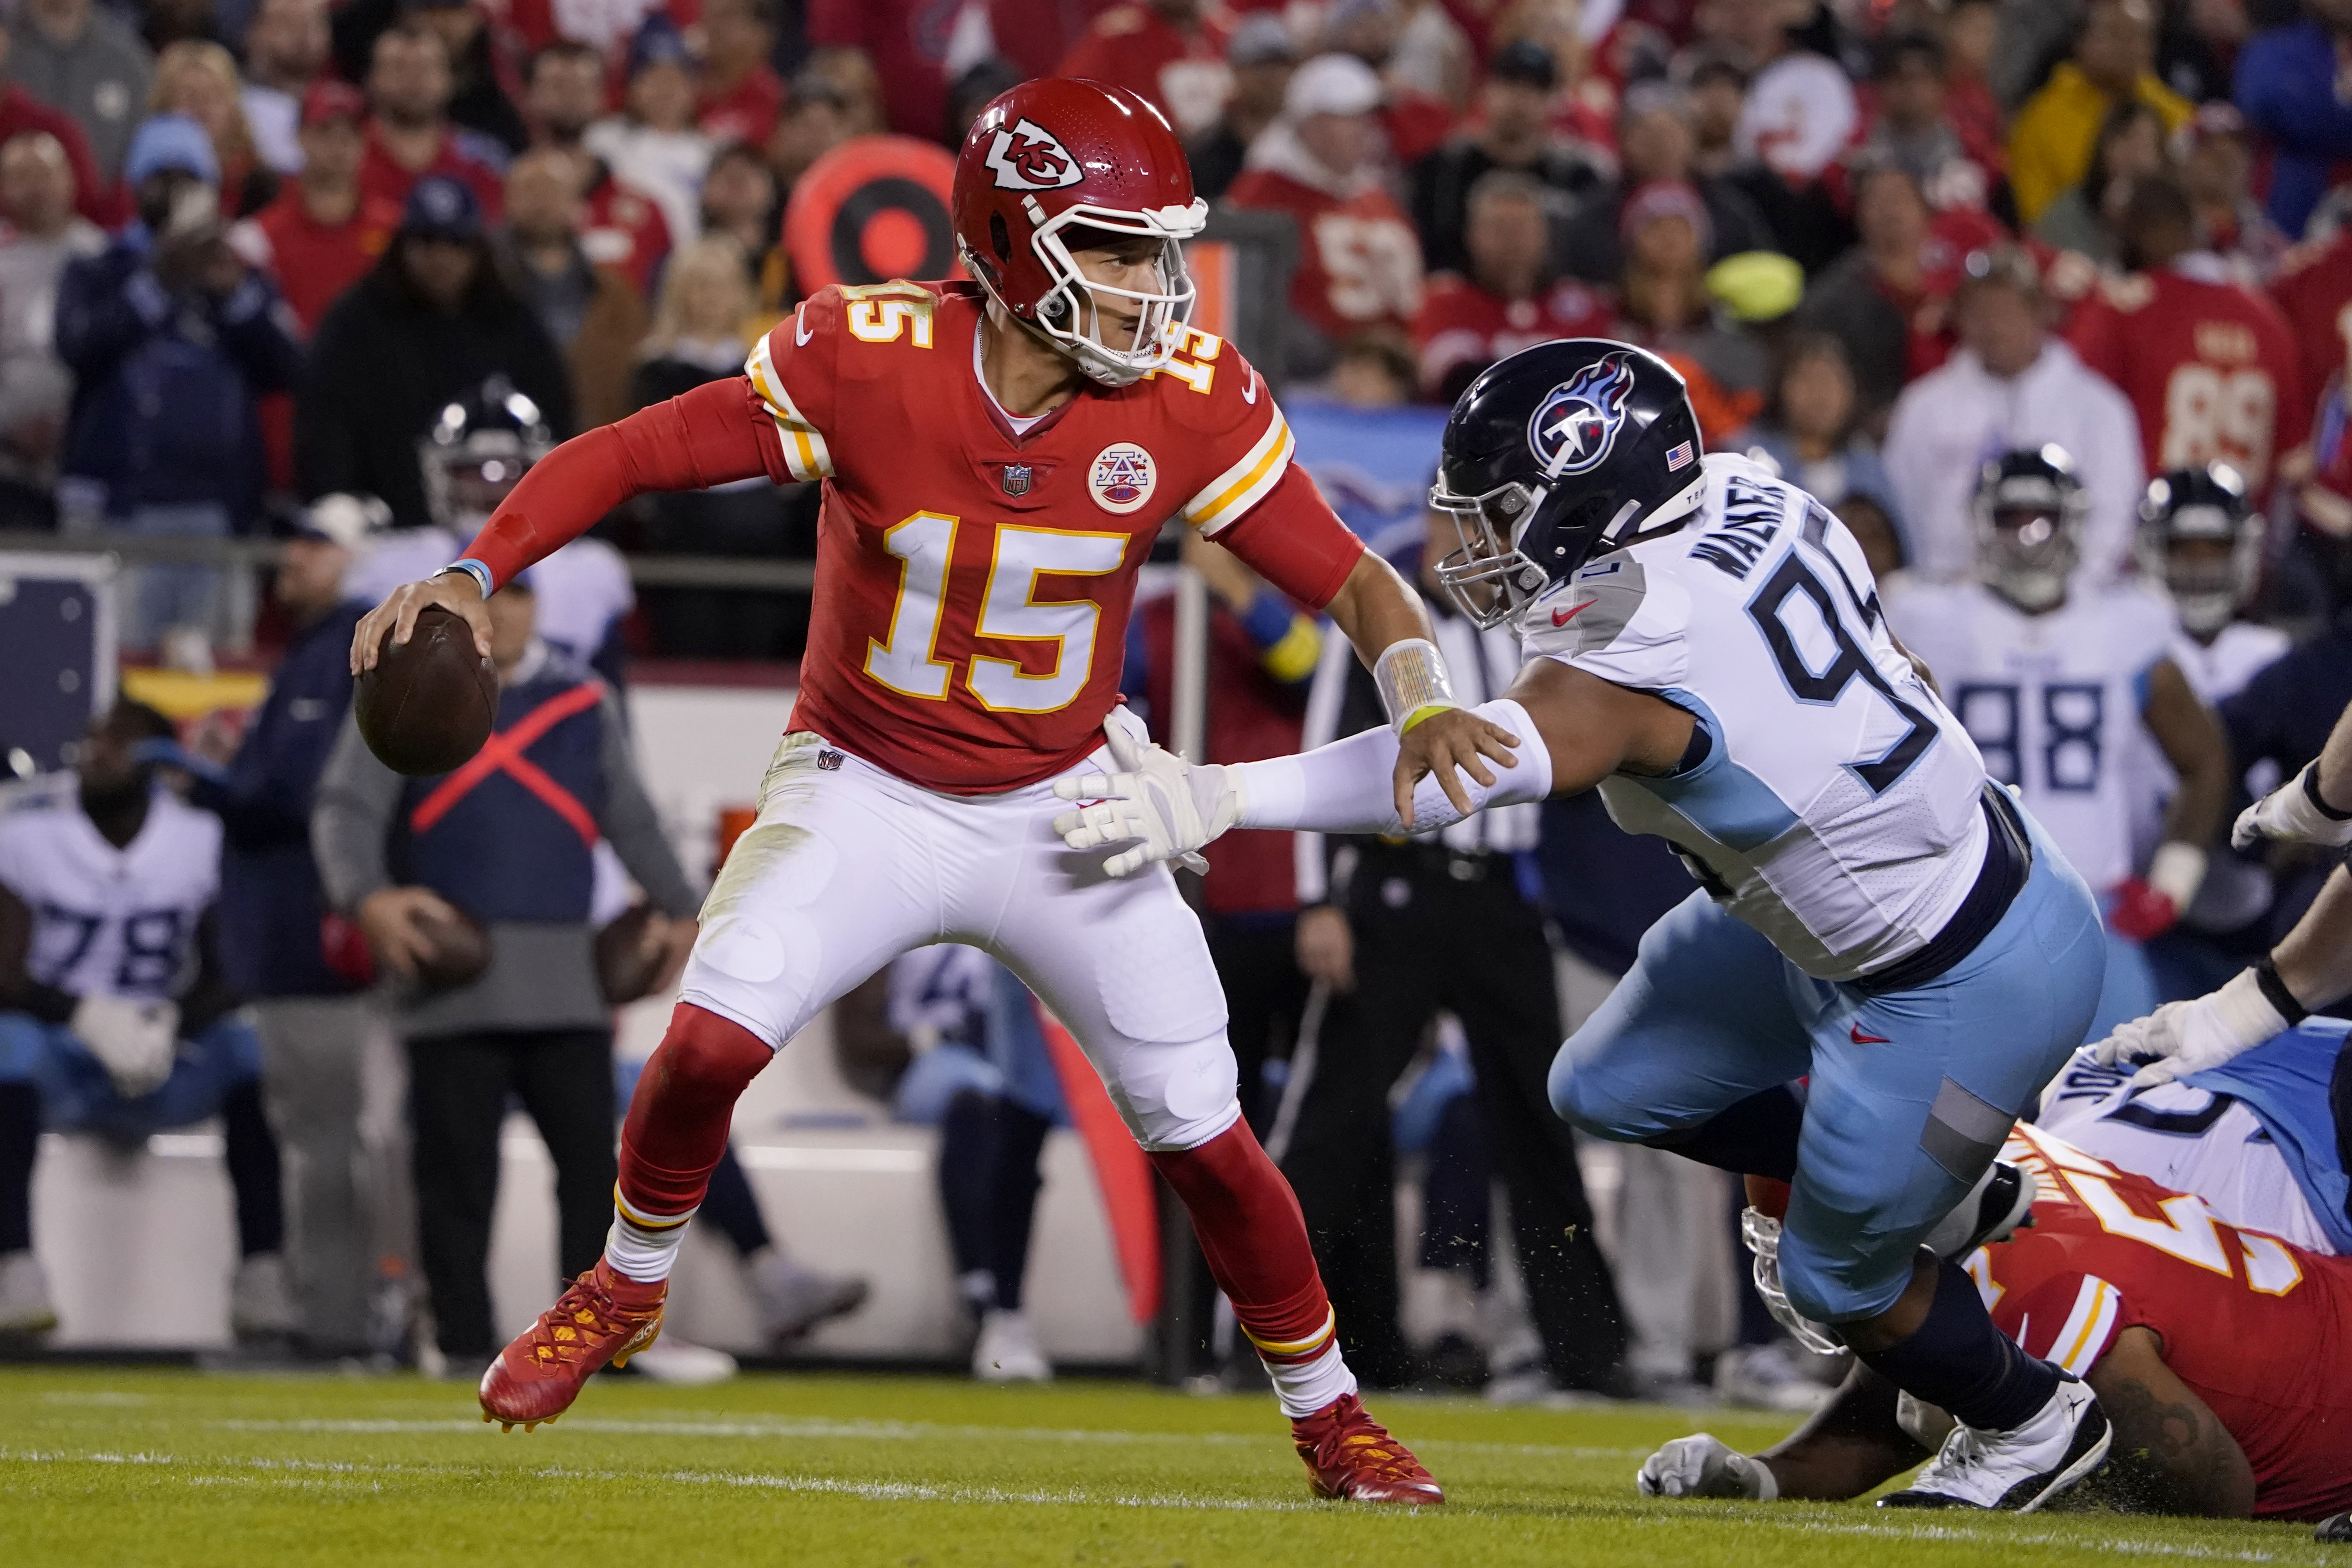 Stopping Titans RB Derrick Henry a goal for Chiefs